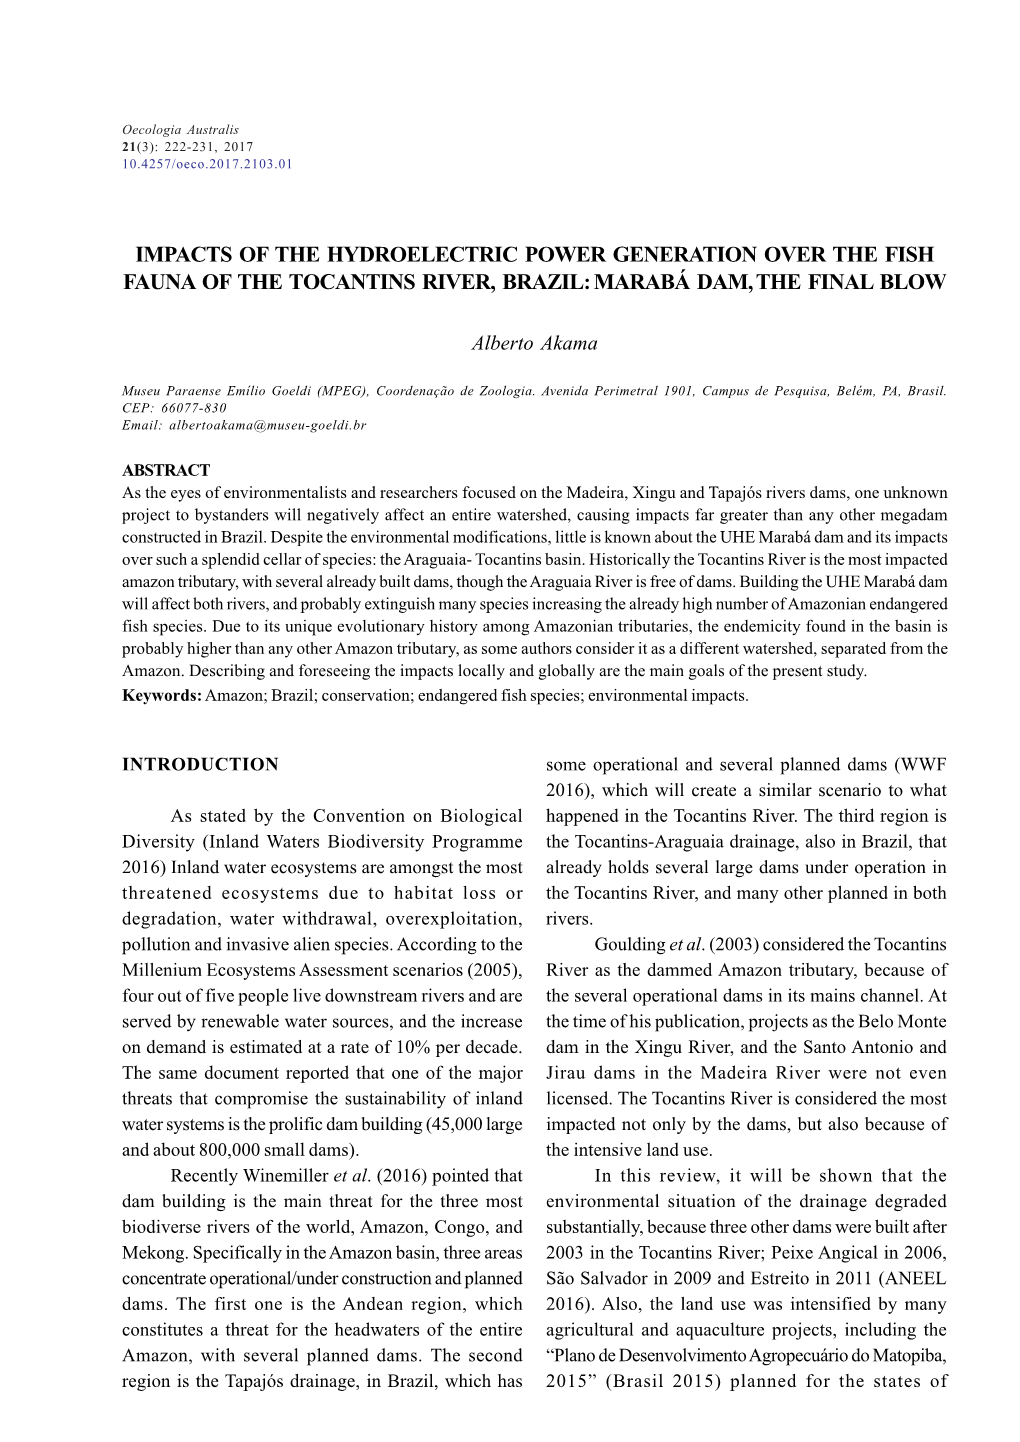 Impacts of the Hydroelectric Power Generation Over the Fish Fauna of the Tocantins River, Brazil: Marabá Dam, the Final Blow